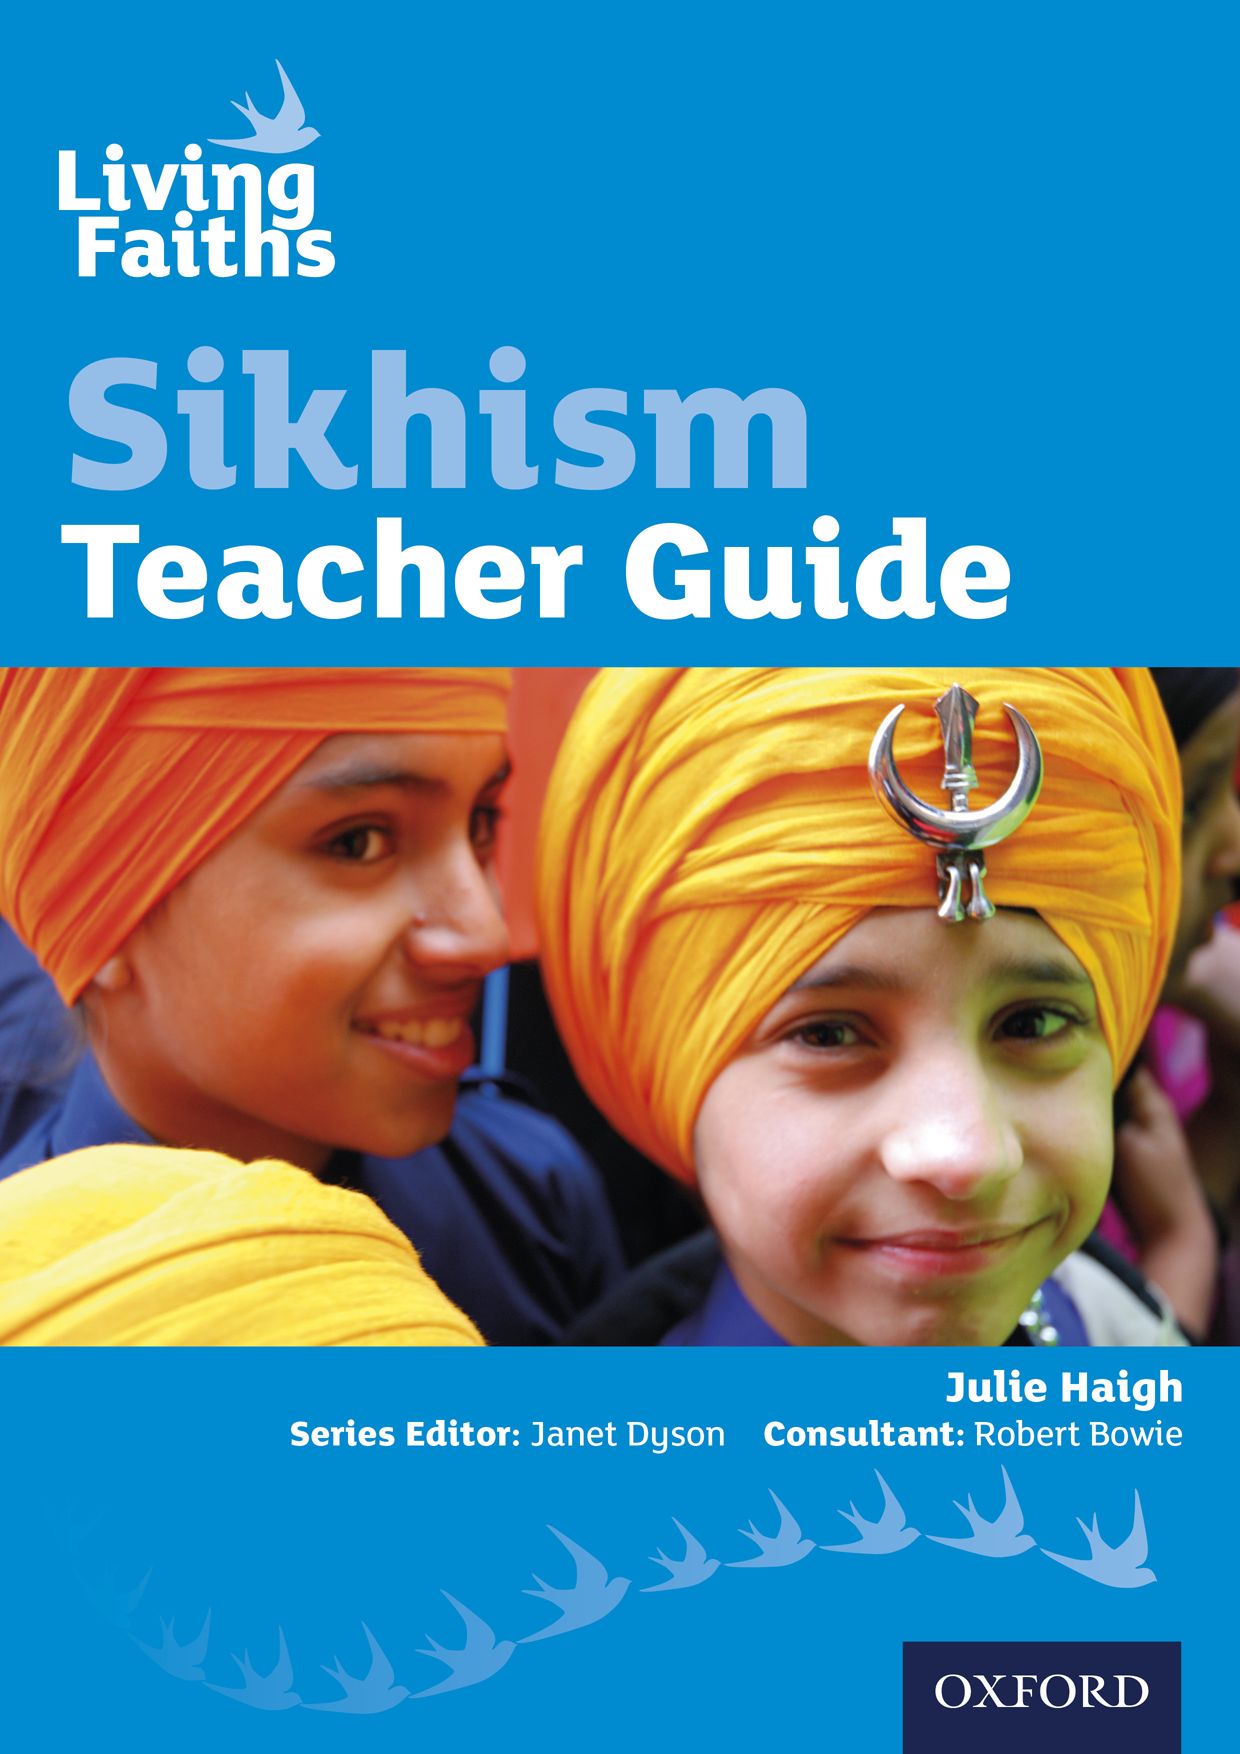 Featured image for “Living Faiths Sikhism Teacher Guide”